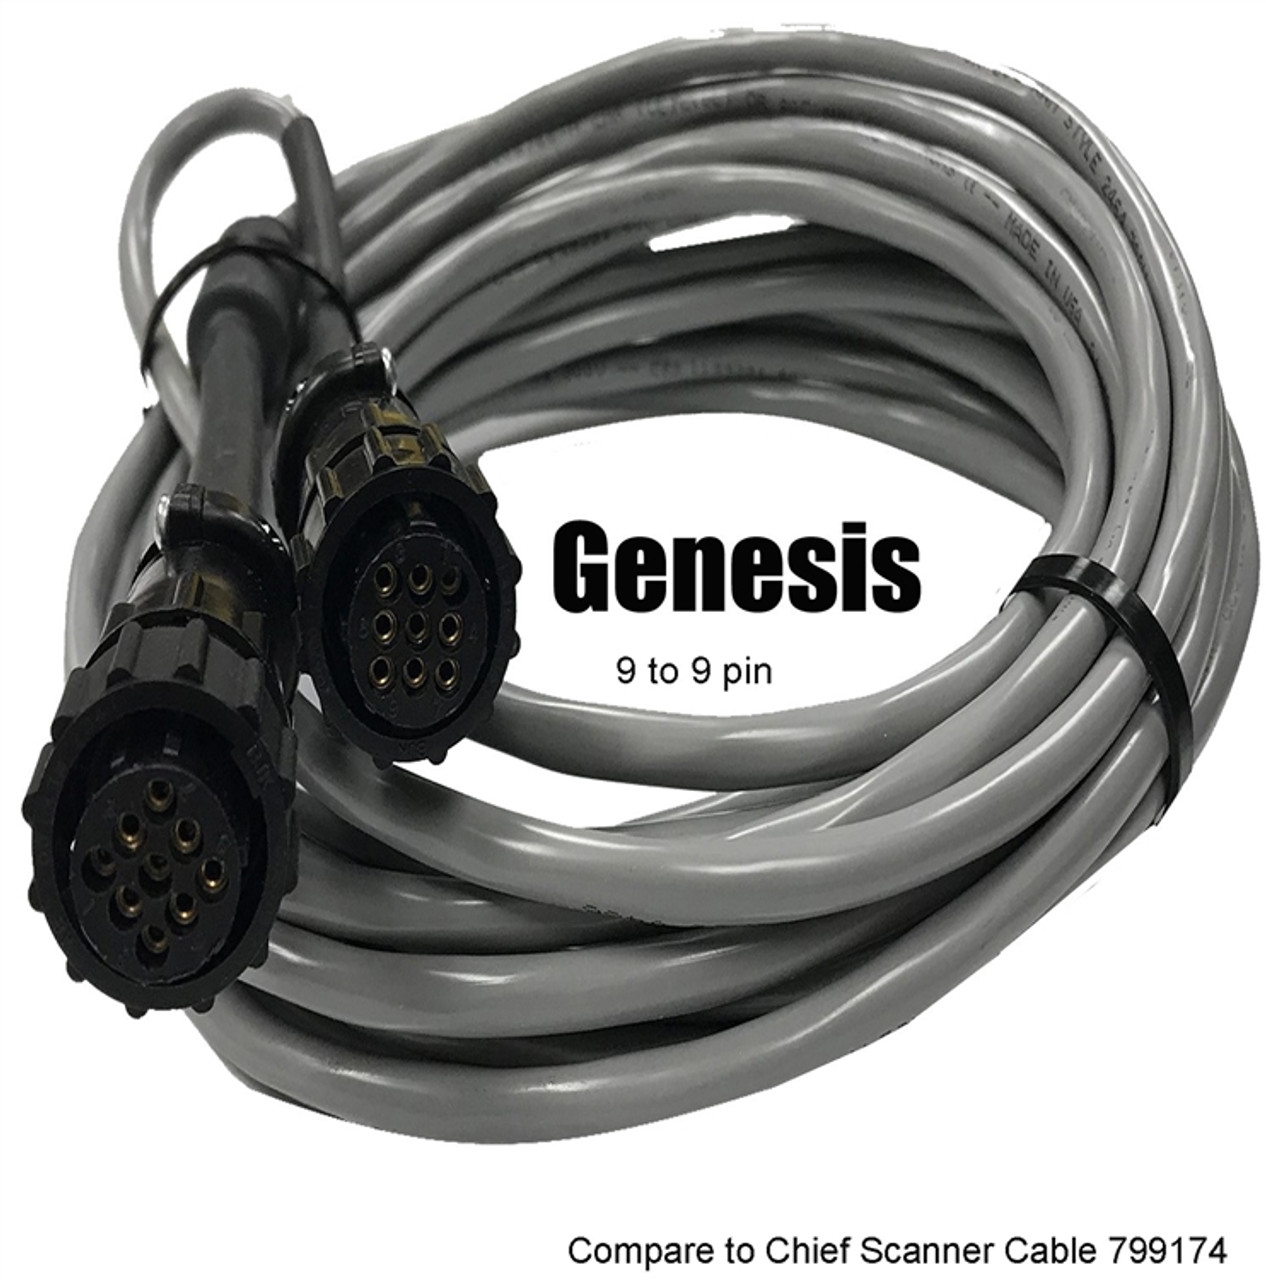 Replacement Chief Genesis Laser Scanner Cable - 9 to 9 Pin